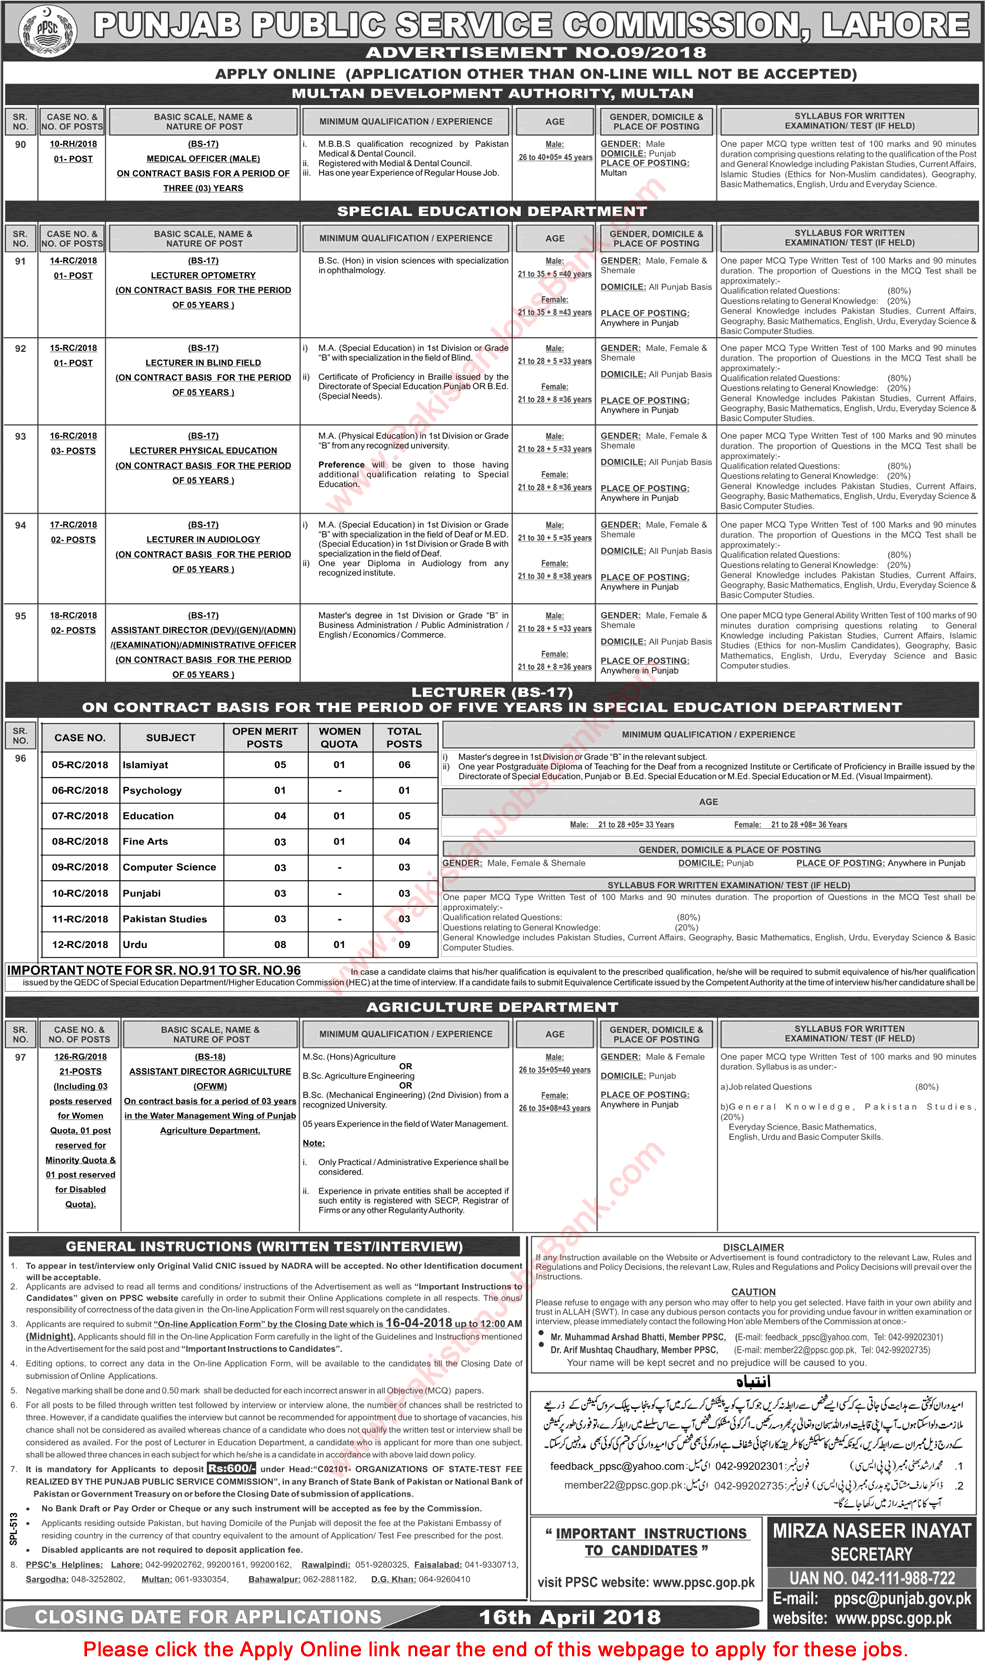 PPSC Jobs April 2018 Apply Online Consolidated Advertisement No 9/2018 09/2018 Latest